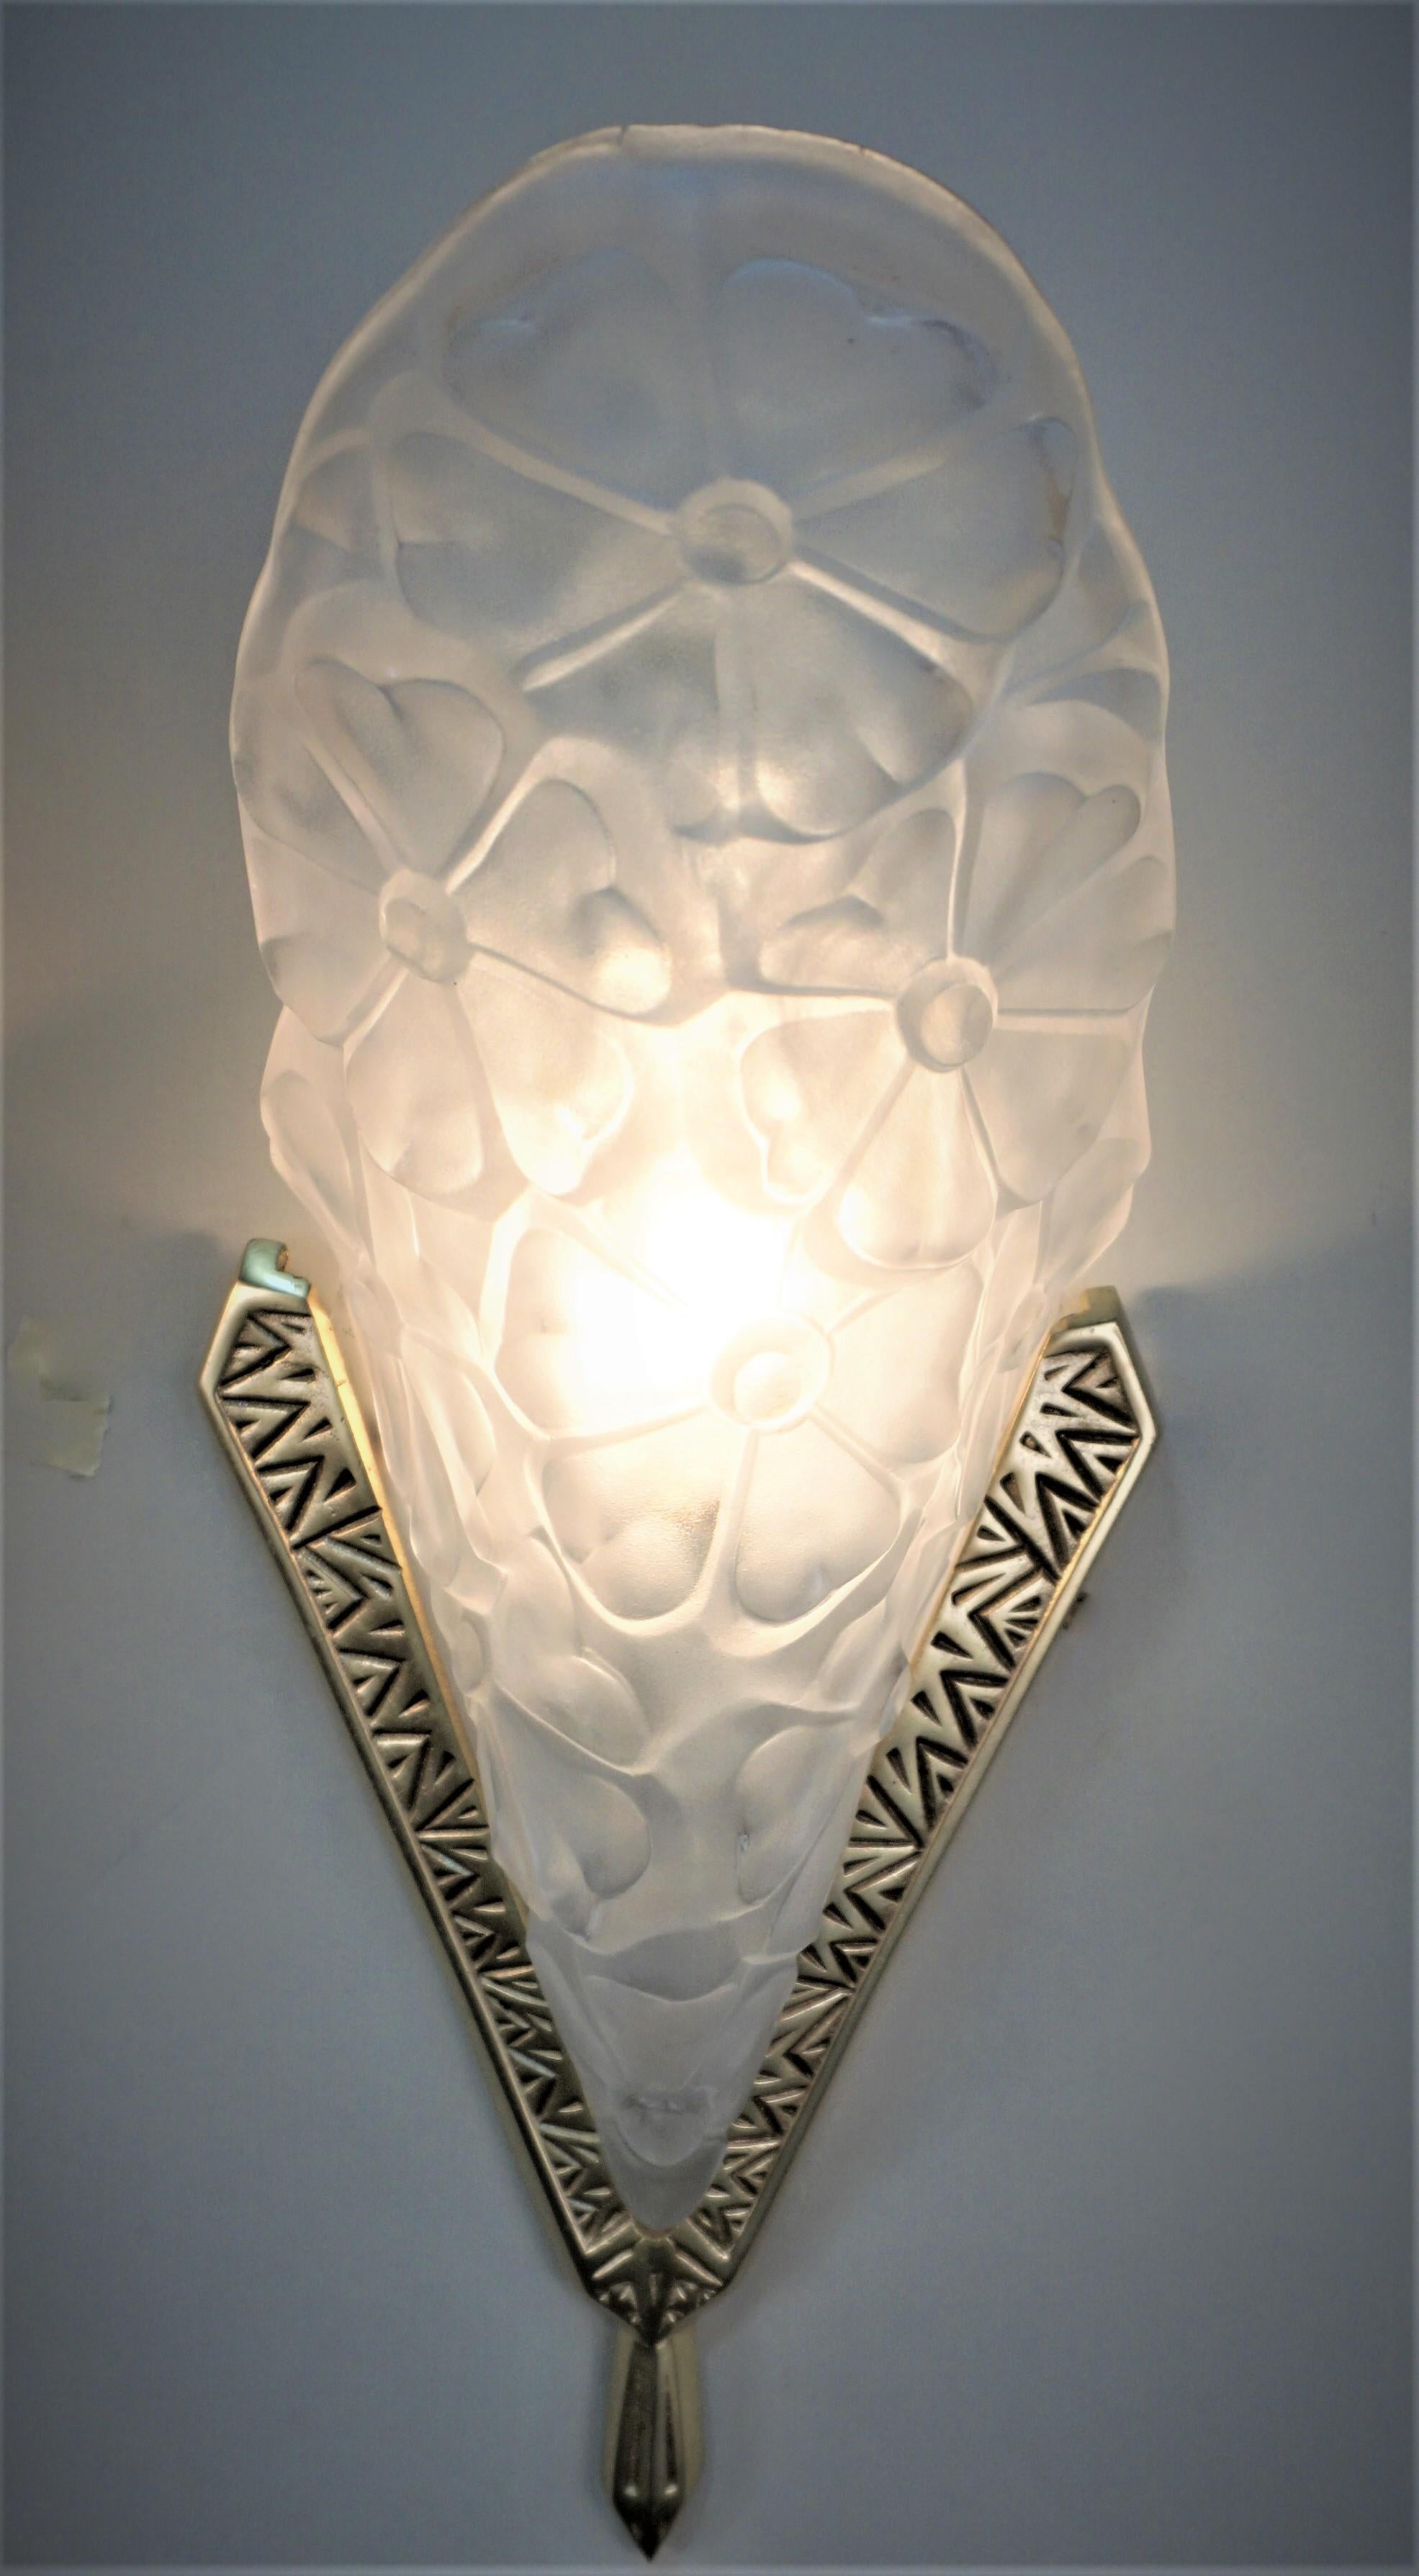 Pair of flora design clear frost glass with bronze frame wall sconces by Degue.
75-watt max each.
Professionally rewired and ready for installation.